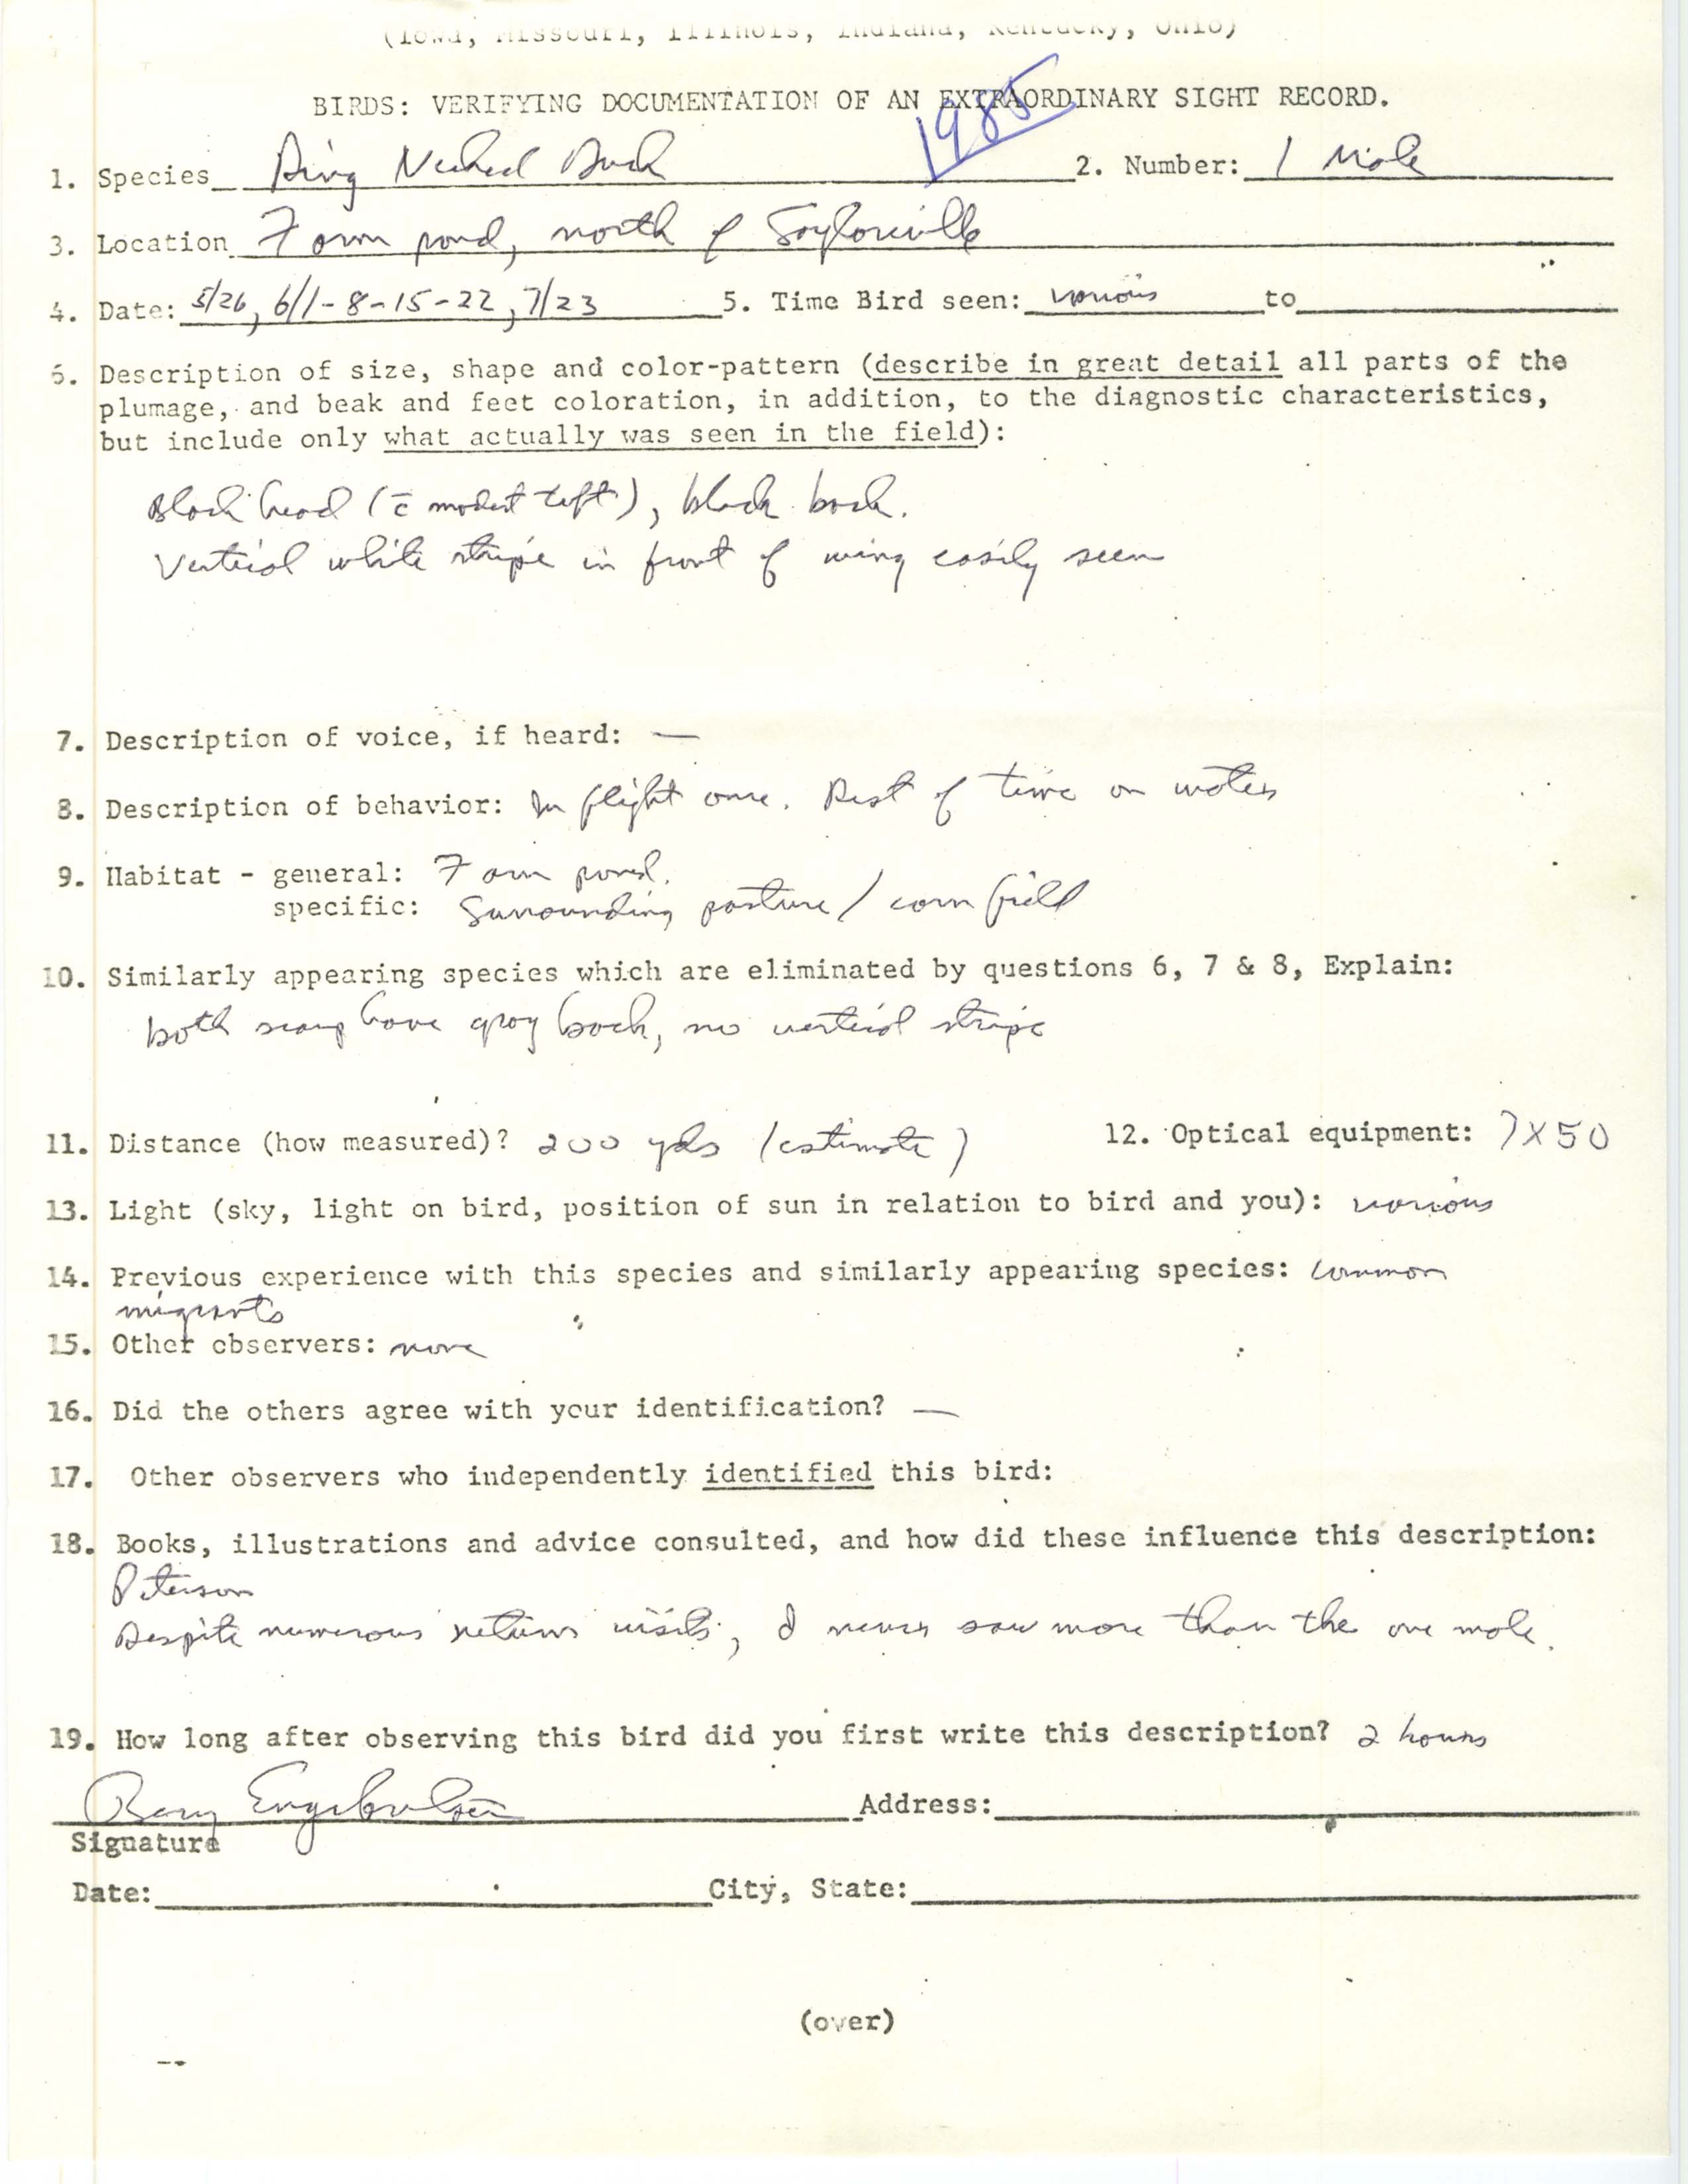 Rare bird documentation form for Ring-necked Duck at Saylorville, 1985